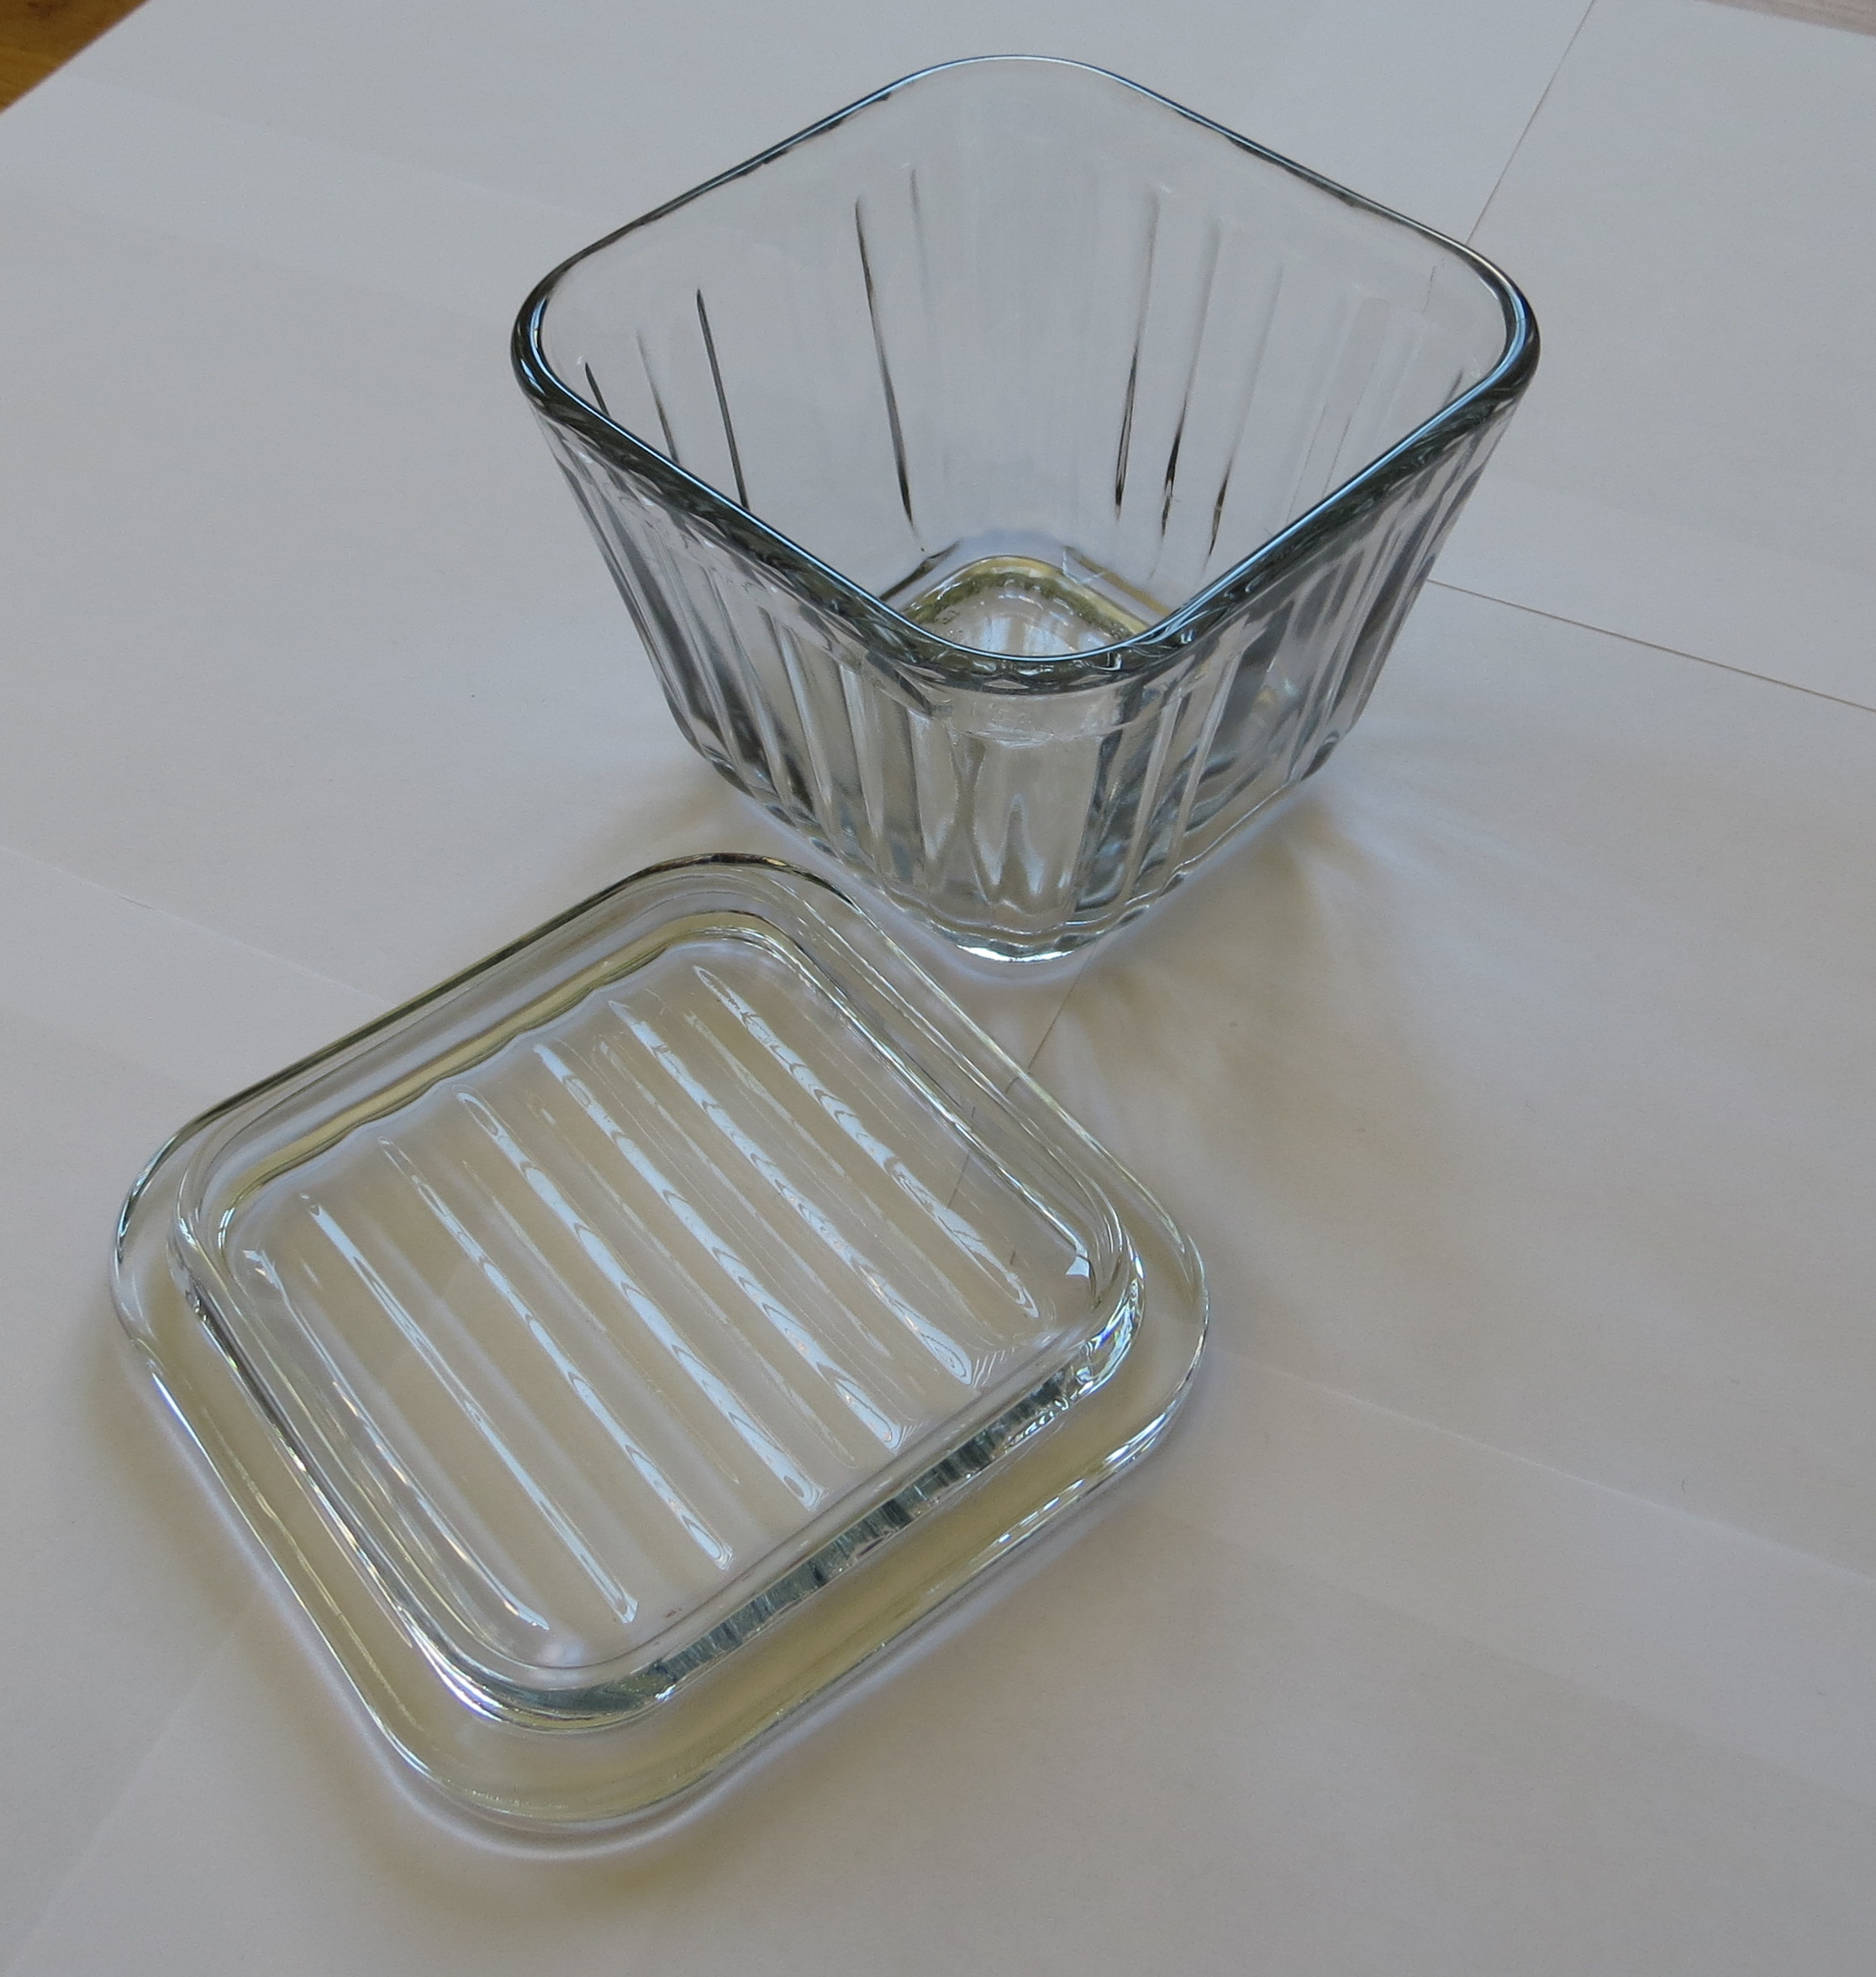 https://gettopics.com/gtc/file/dom/com/div/2019/anchor-hocking-bake-and-store-with-glass-lid-small-rectangular-square.jpg